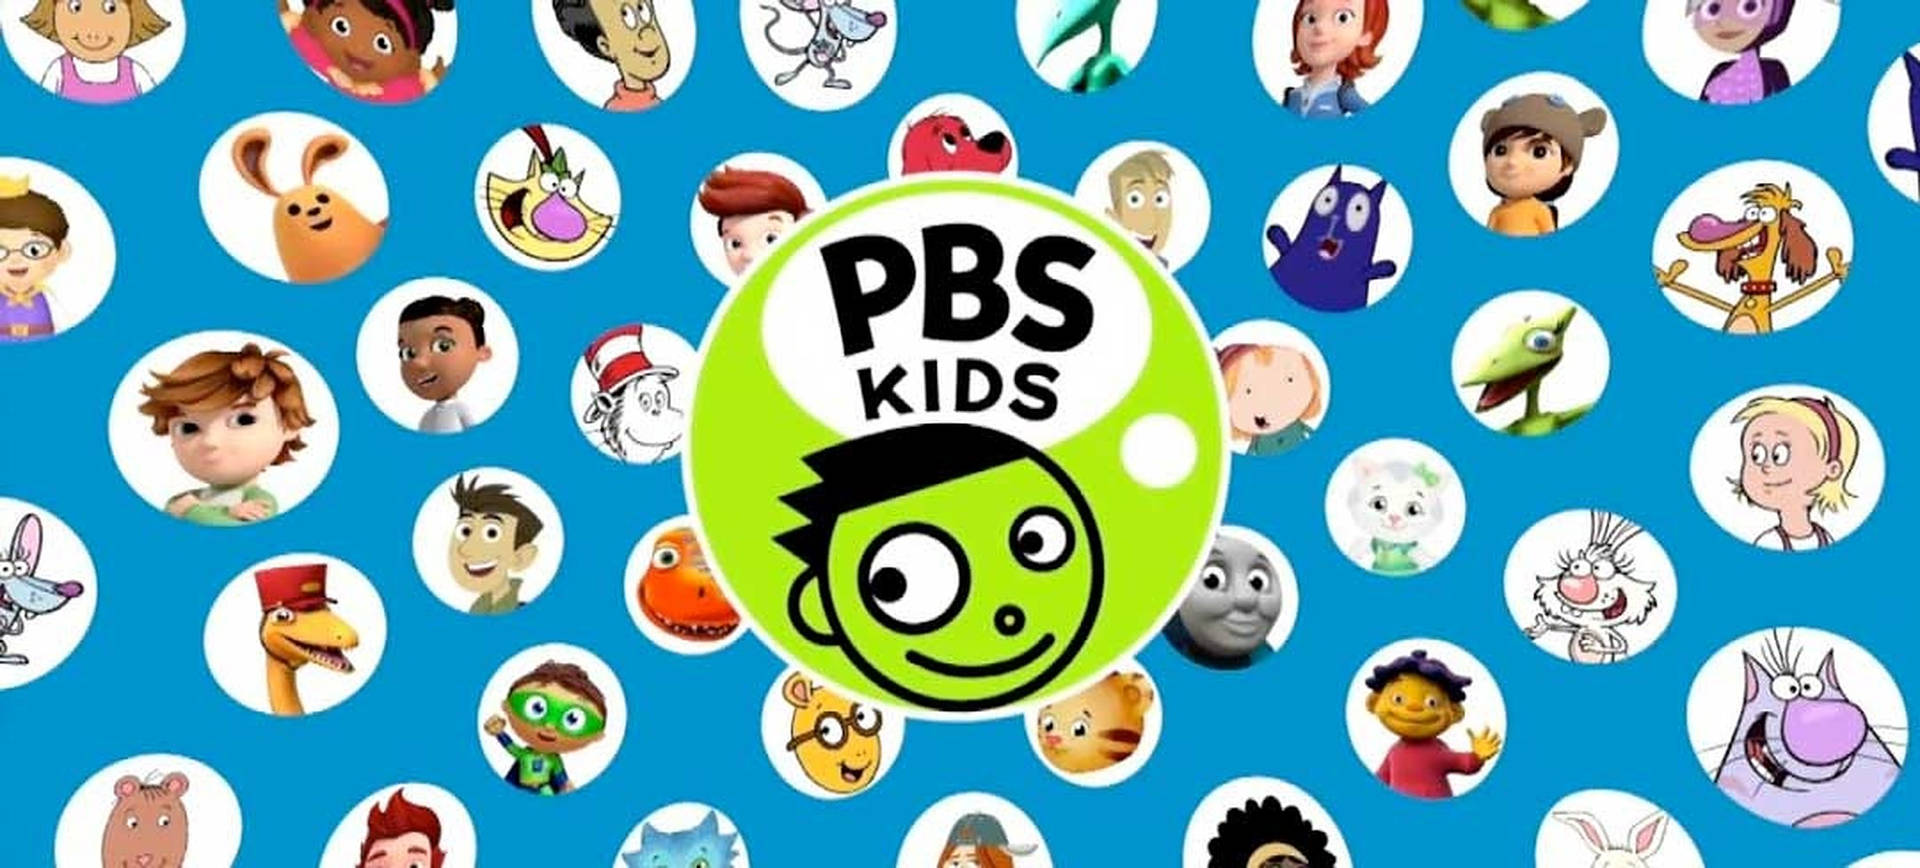 Pbs Kids Cartoon Characters Background